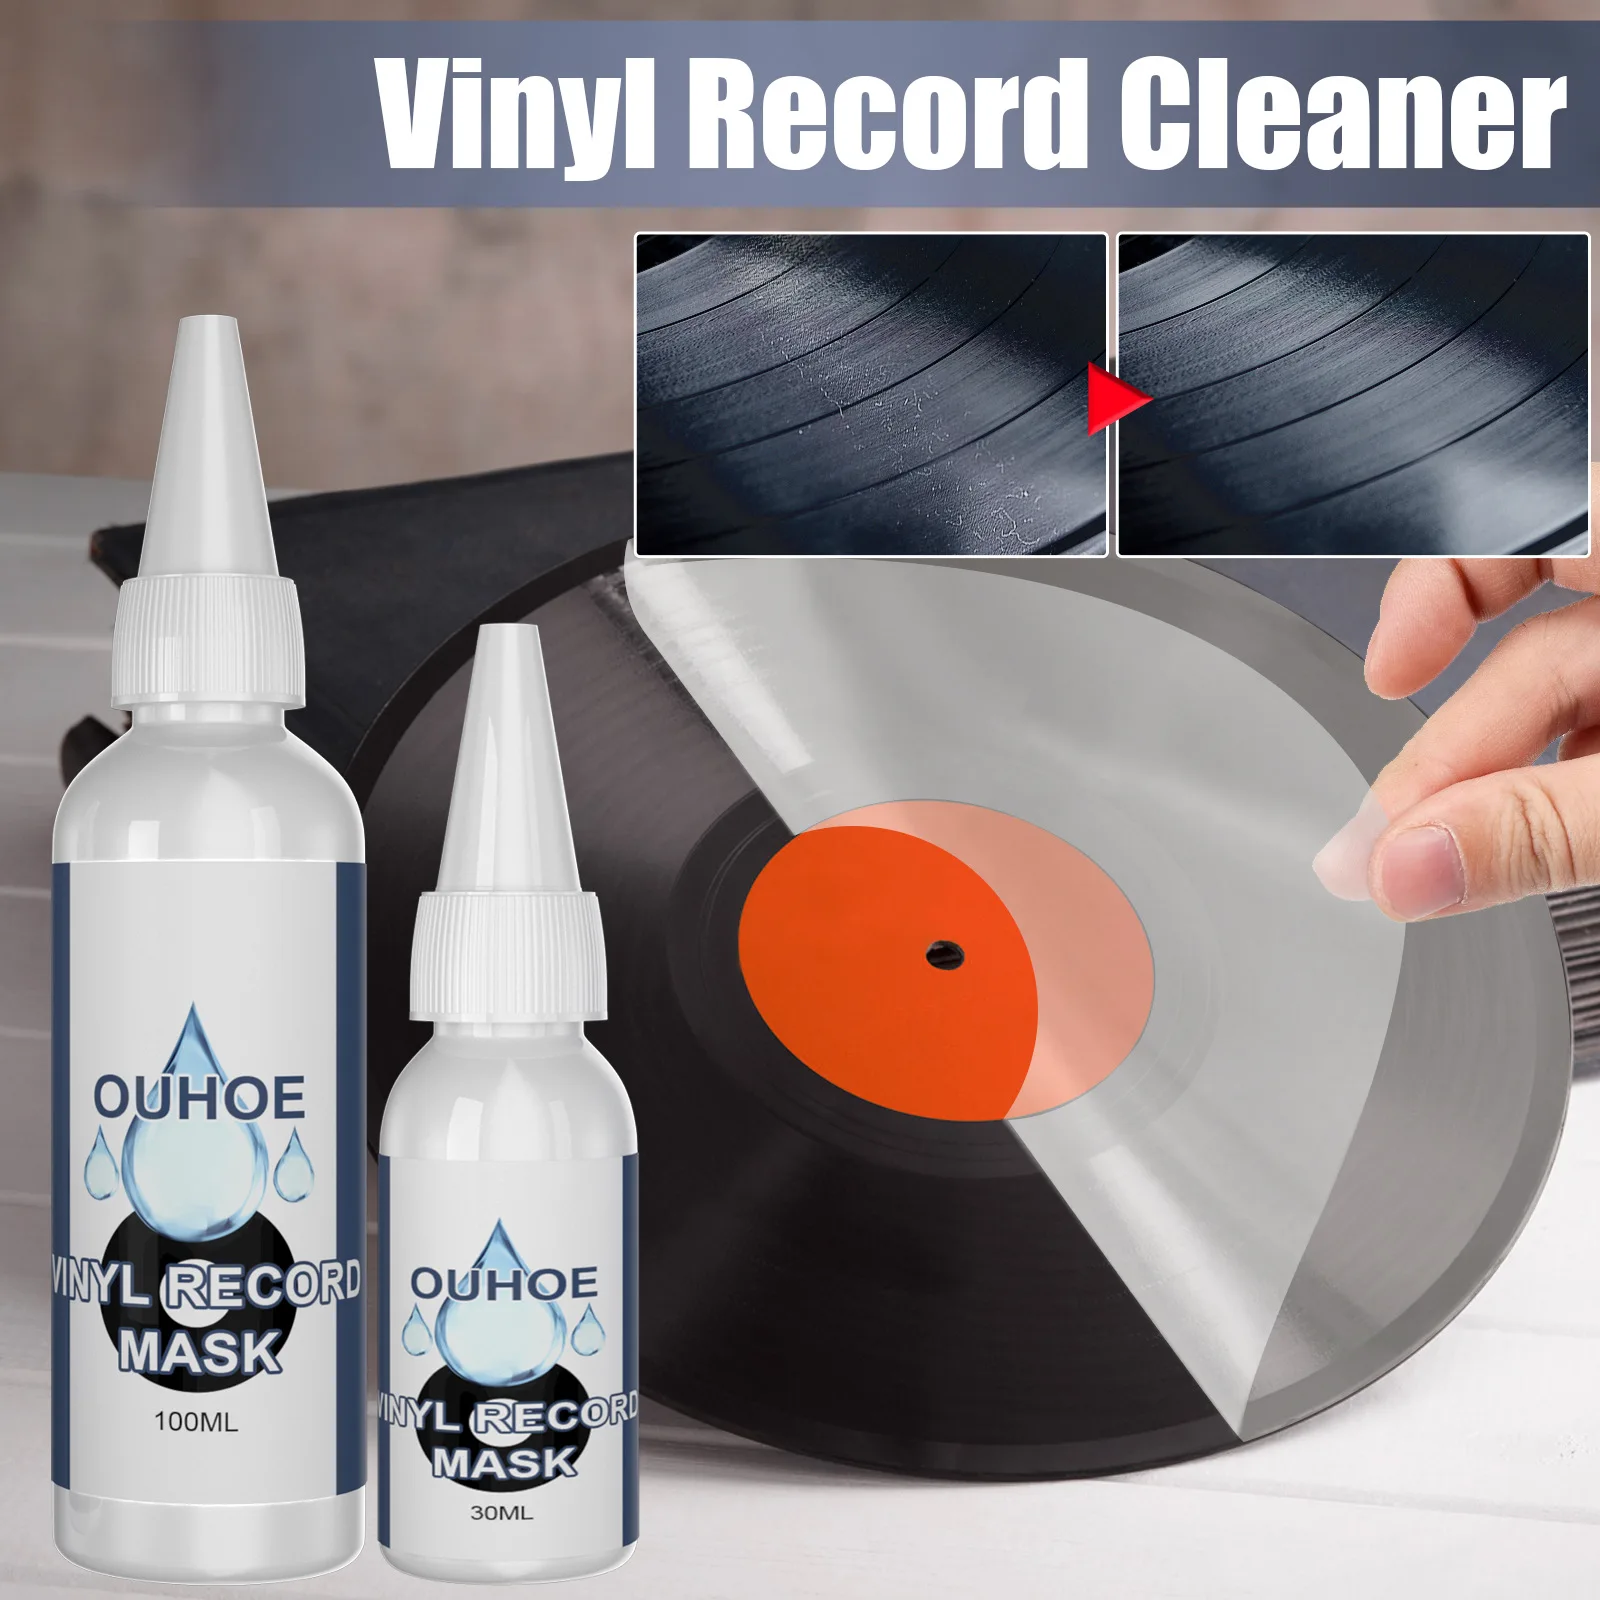 

Vinyl Record Cleaner Professional Dust Removal Anti-static Detergent Clear Dirt Degreasing Decontamination LP/CD Record Cleaner